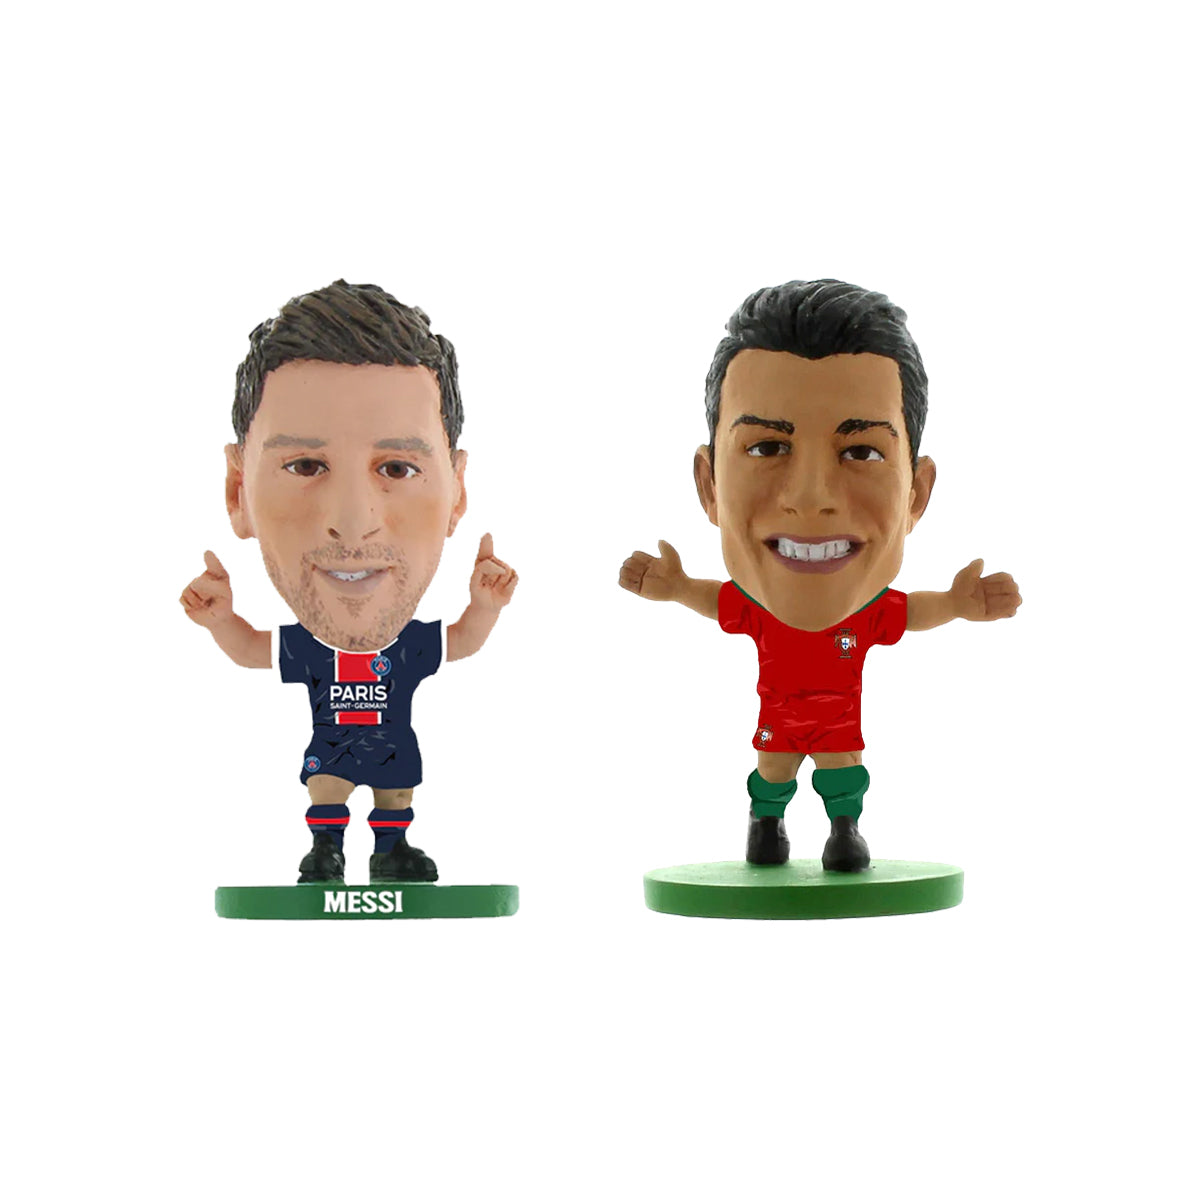 Buy Arsenal SoccerStarz 3-Piece Combo Pack online at SoccerCards.ca!